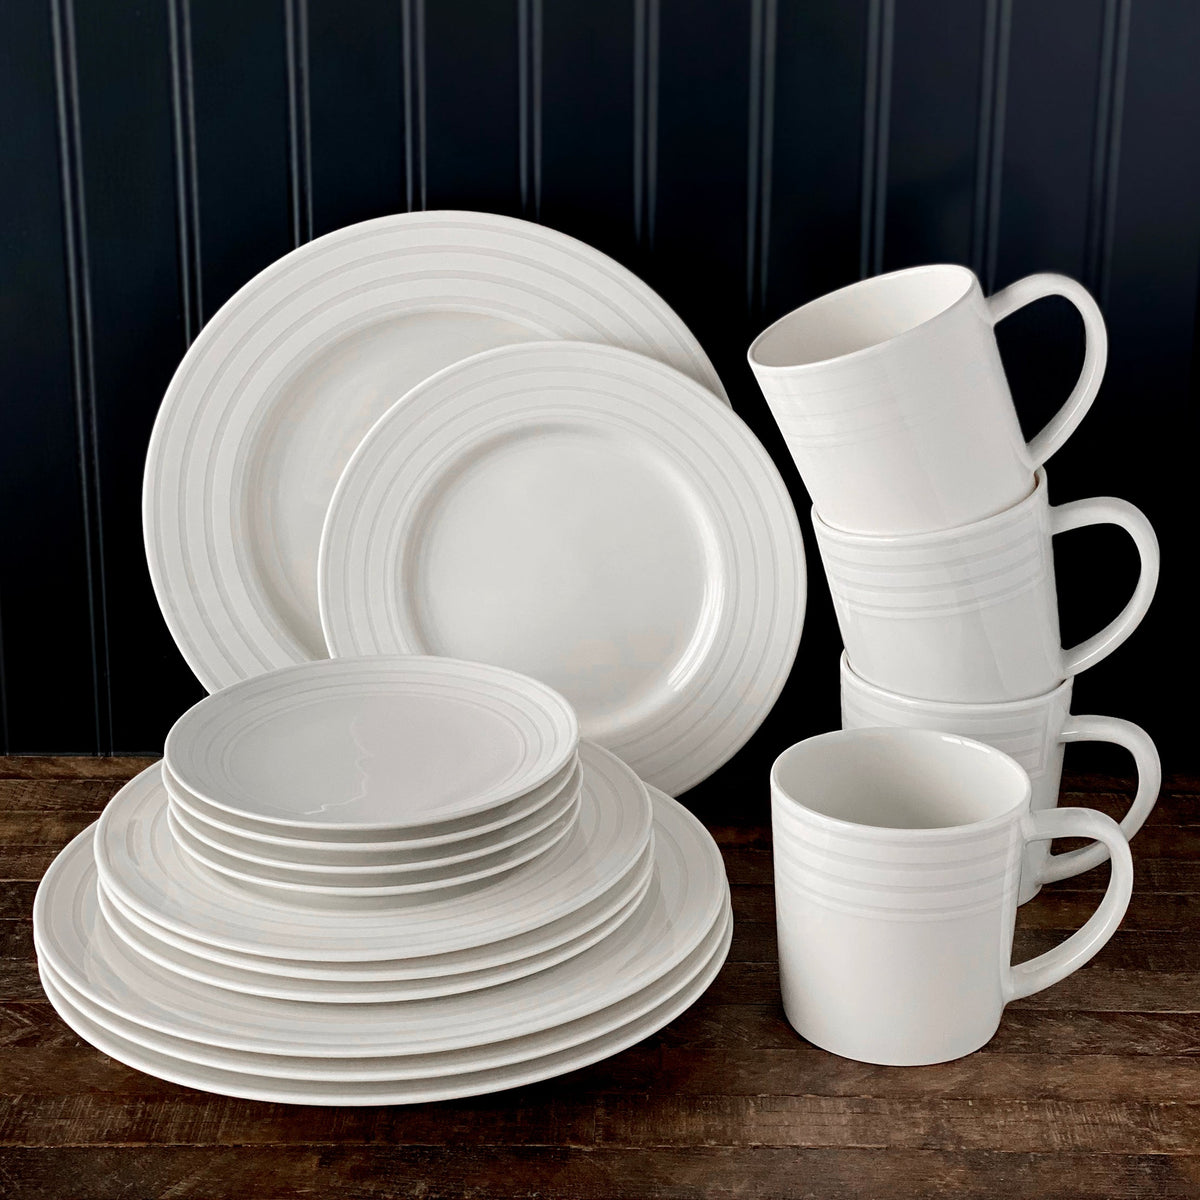 A neatly stacked set of white dishware, including Caskata Artisanal Home Cambridge Stripe Rimmed Salad Plates, bowls, and mugs, arranged against a dark-paneled background on a wooden surface.